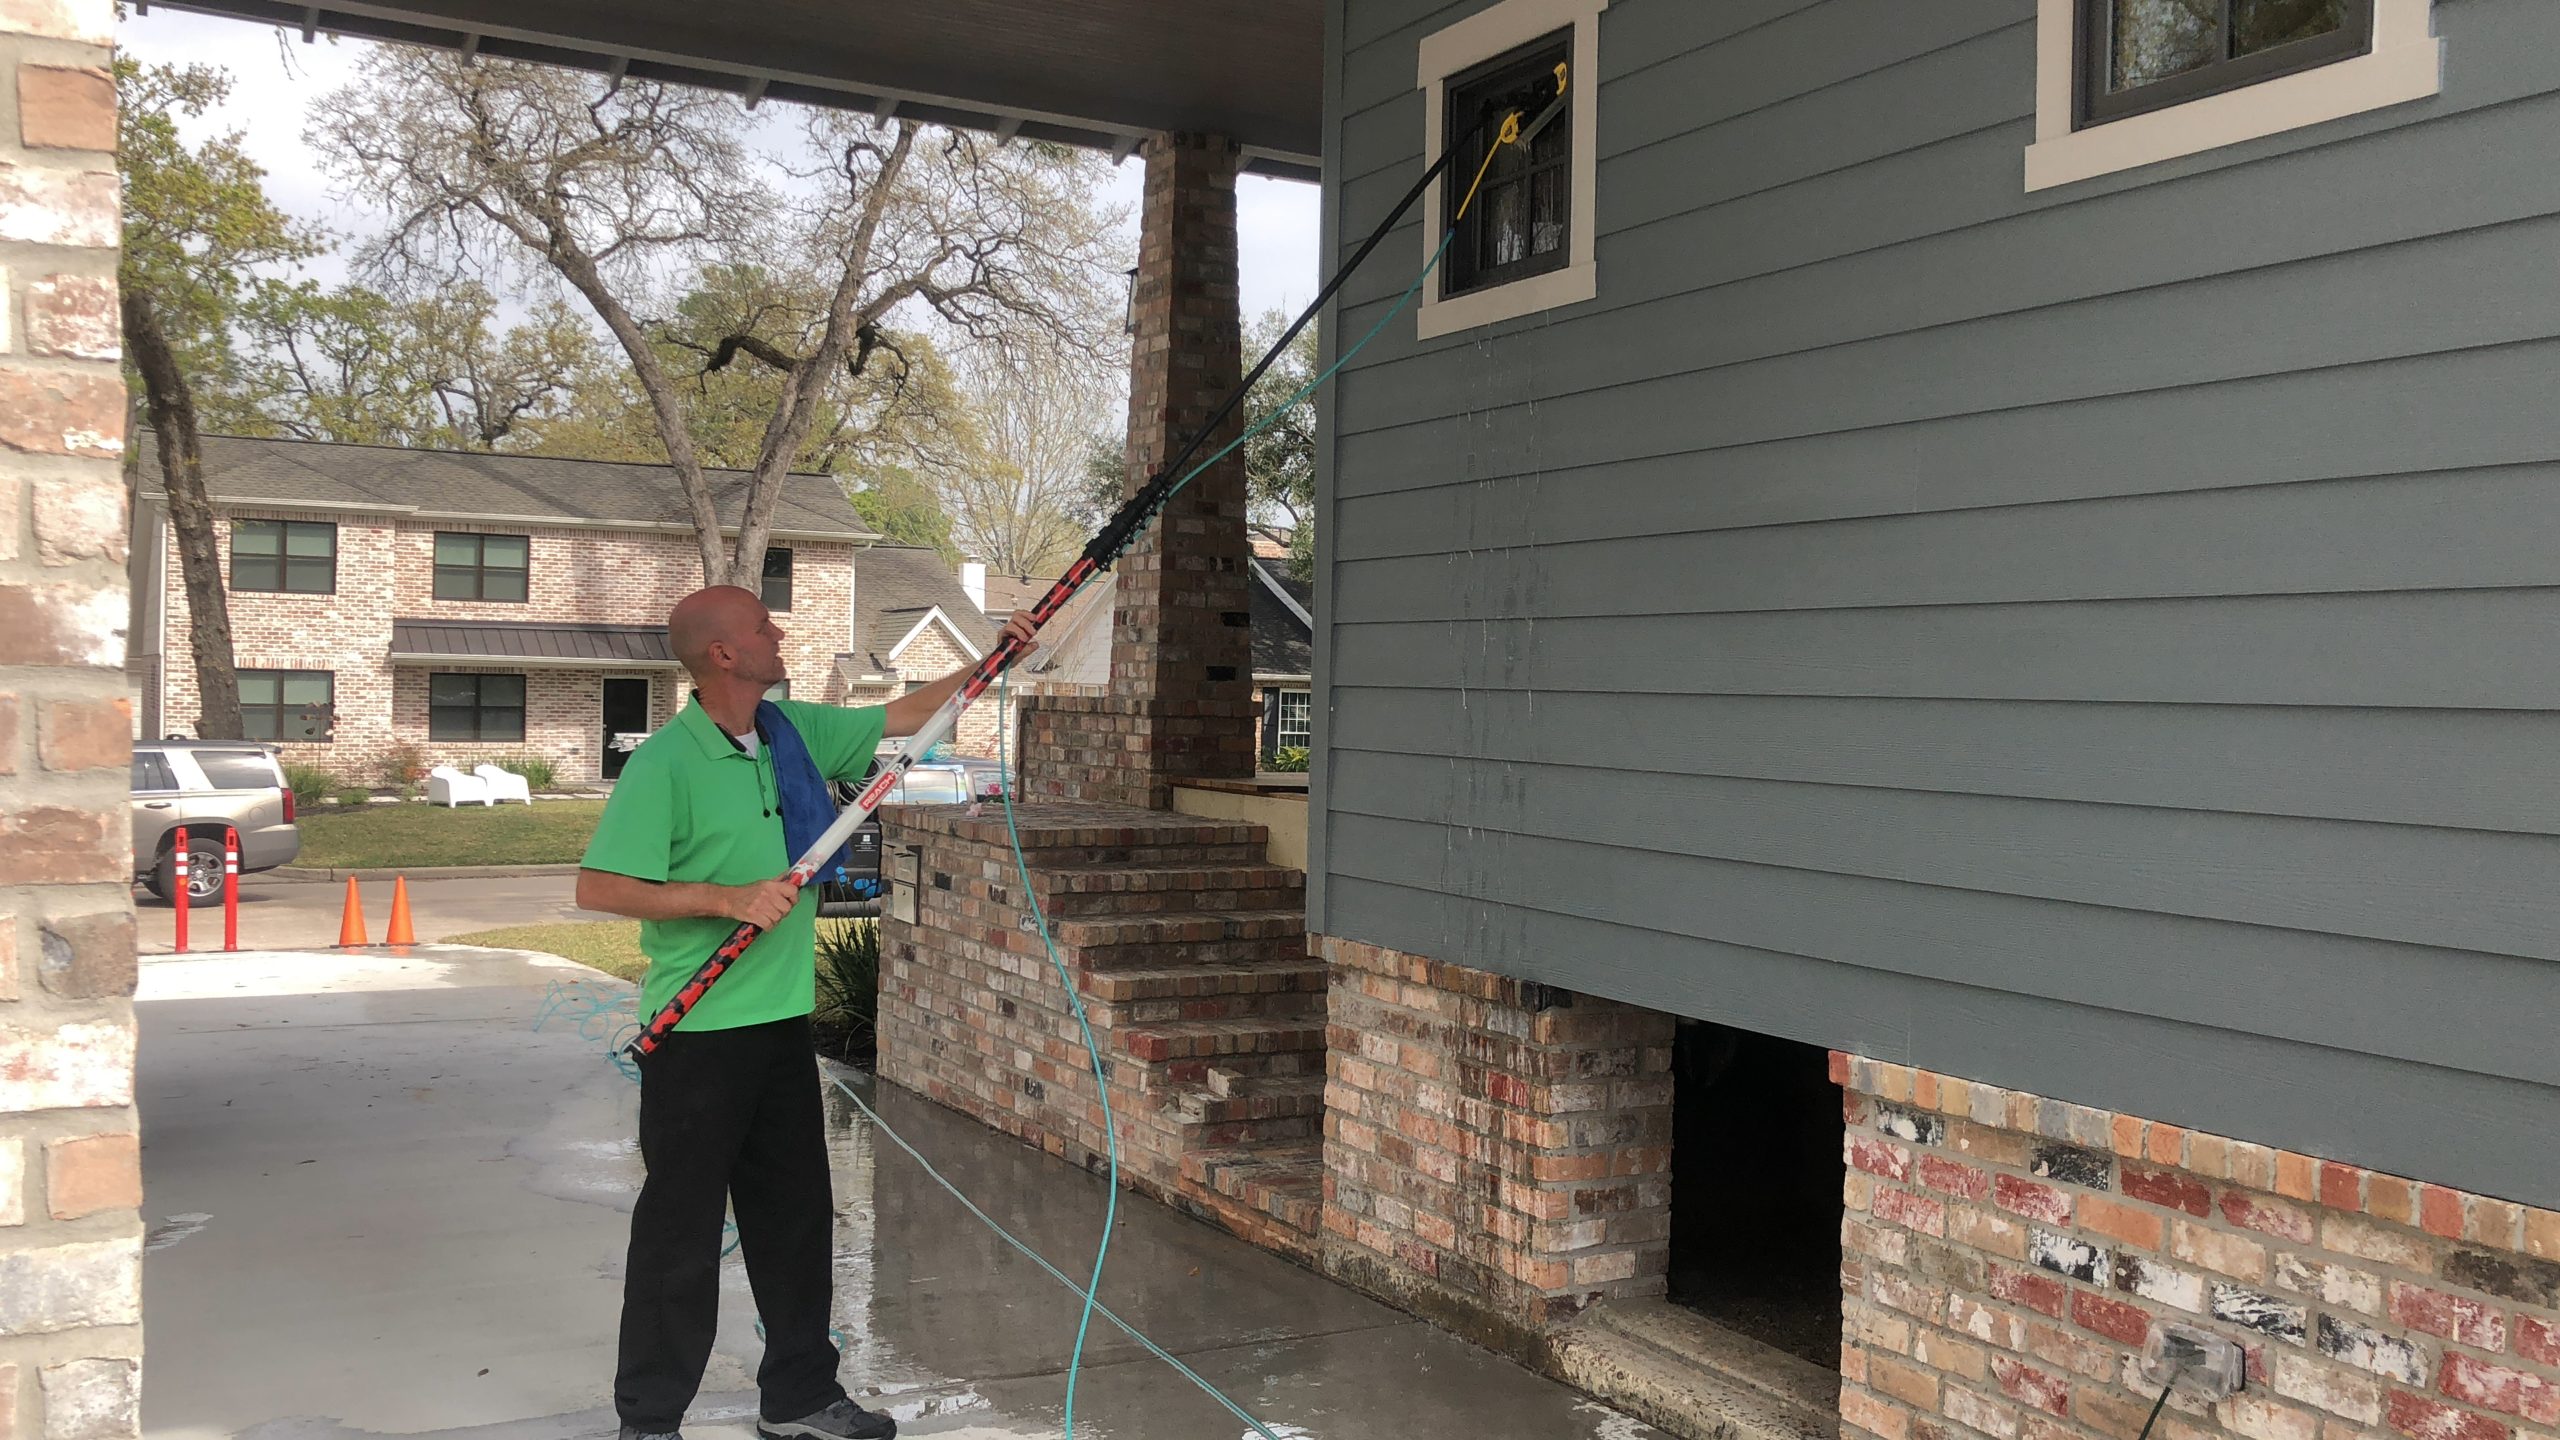 clearview window cleaning savannah